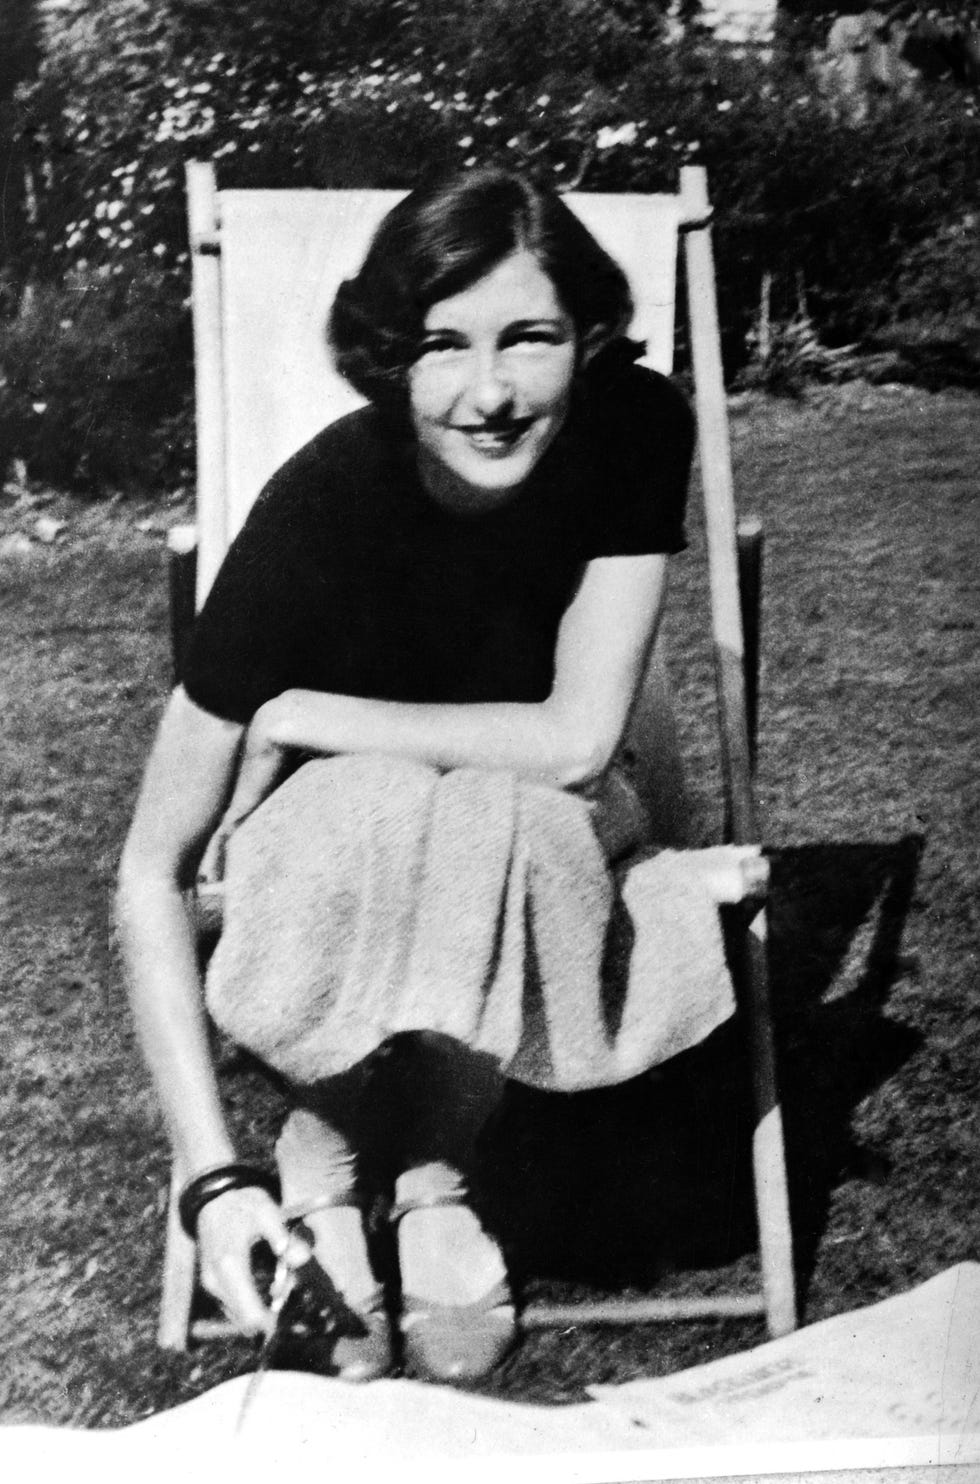 christine granville 1915 1952 pictured circa 1950 the daughter of a polish count, she worked as a special operations executive soe agent for the british during world war ii she was stabbed to death in 1952 at the kensington hotel by spurned admirer george muldowney photo by keystonehulton archivegetty images